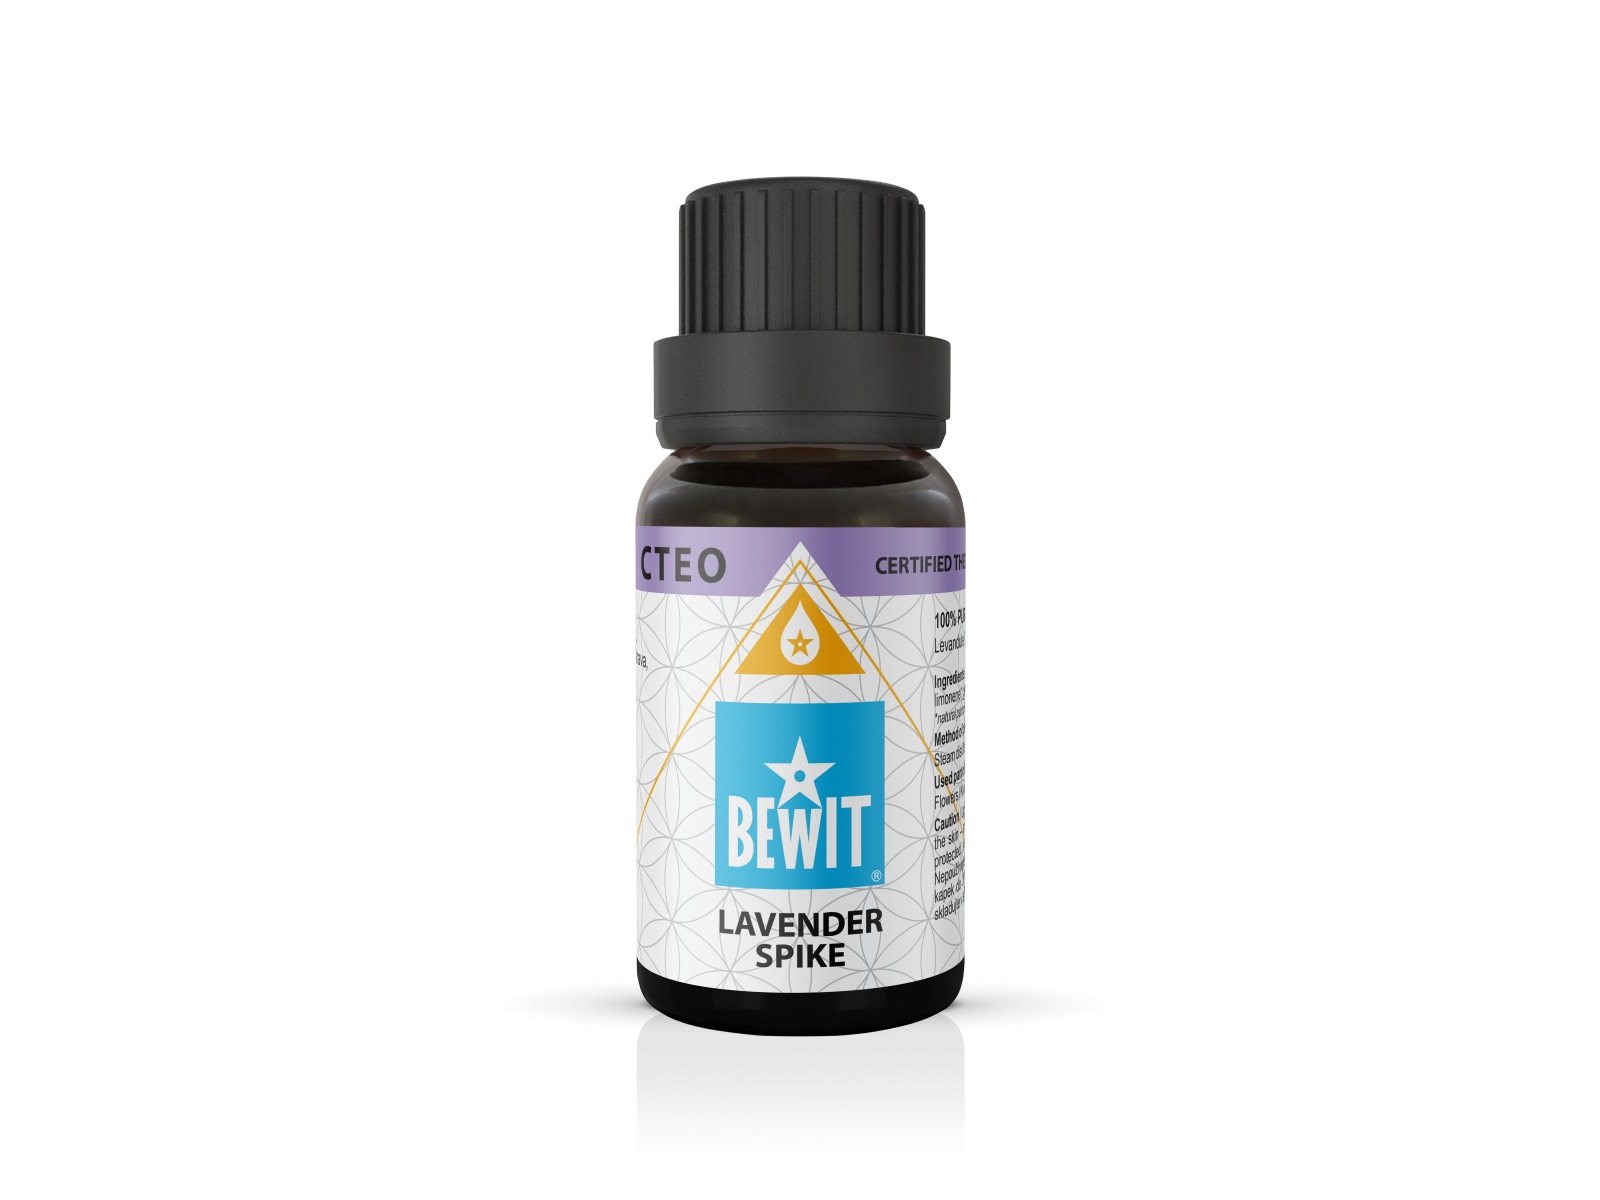 BEWIT Lavender Spike - 100% pure and natural CTEO® essential oil - 3